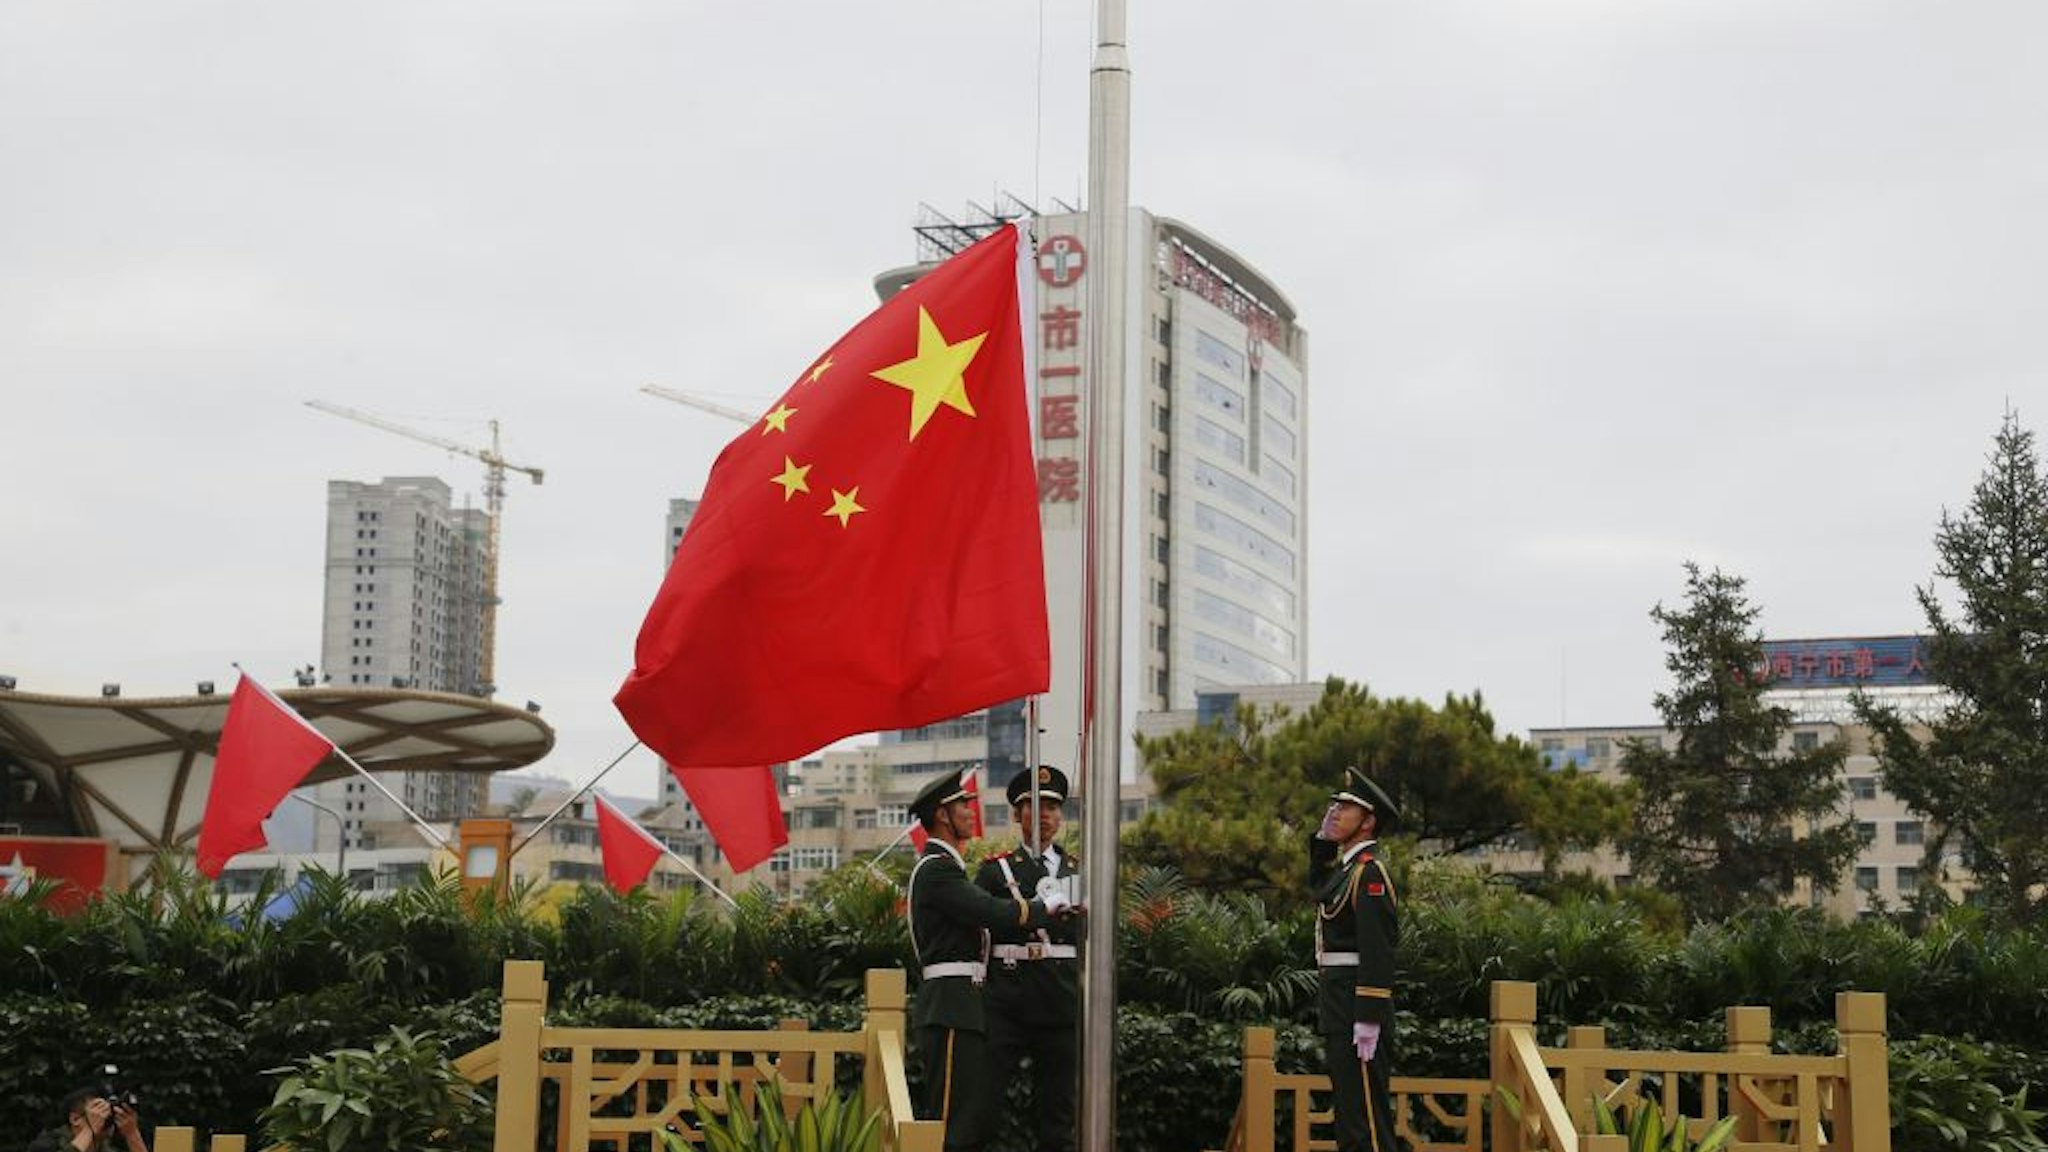 Soldiers of the People's Liberation Army (PLA) honor guard perform the flag-raising ceremony at a square to mark the 71st Anniversary of the Founding of the People's Republic of China on October 1, 2020 in Xining, Qinghai Province of China.